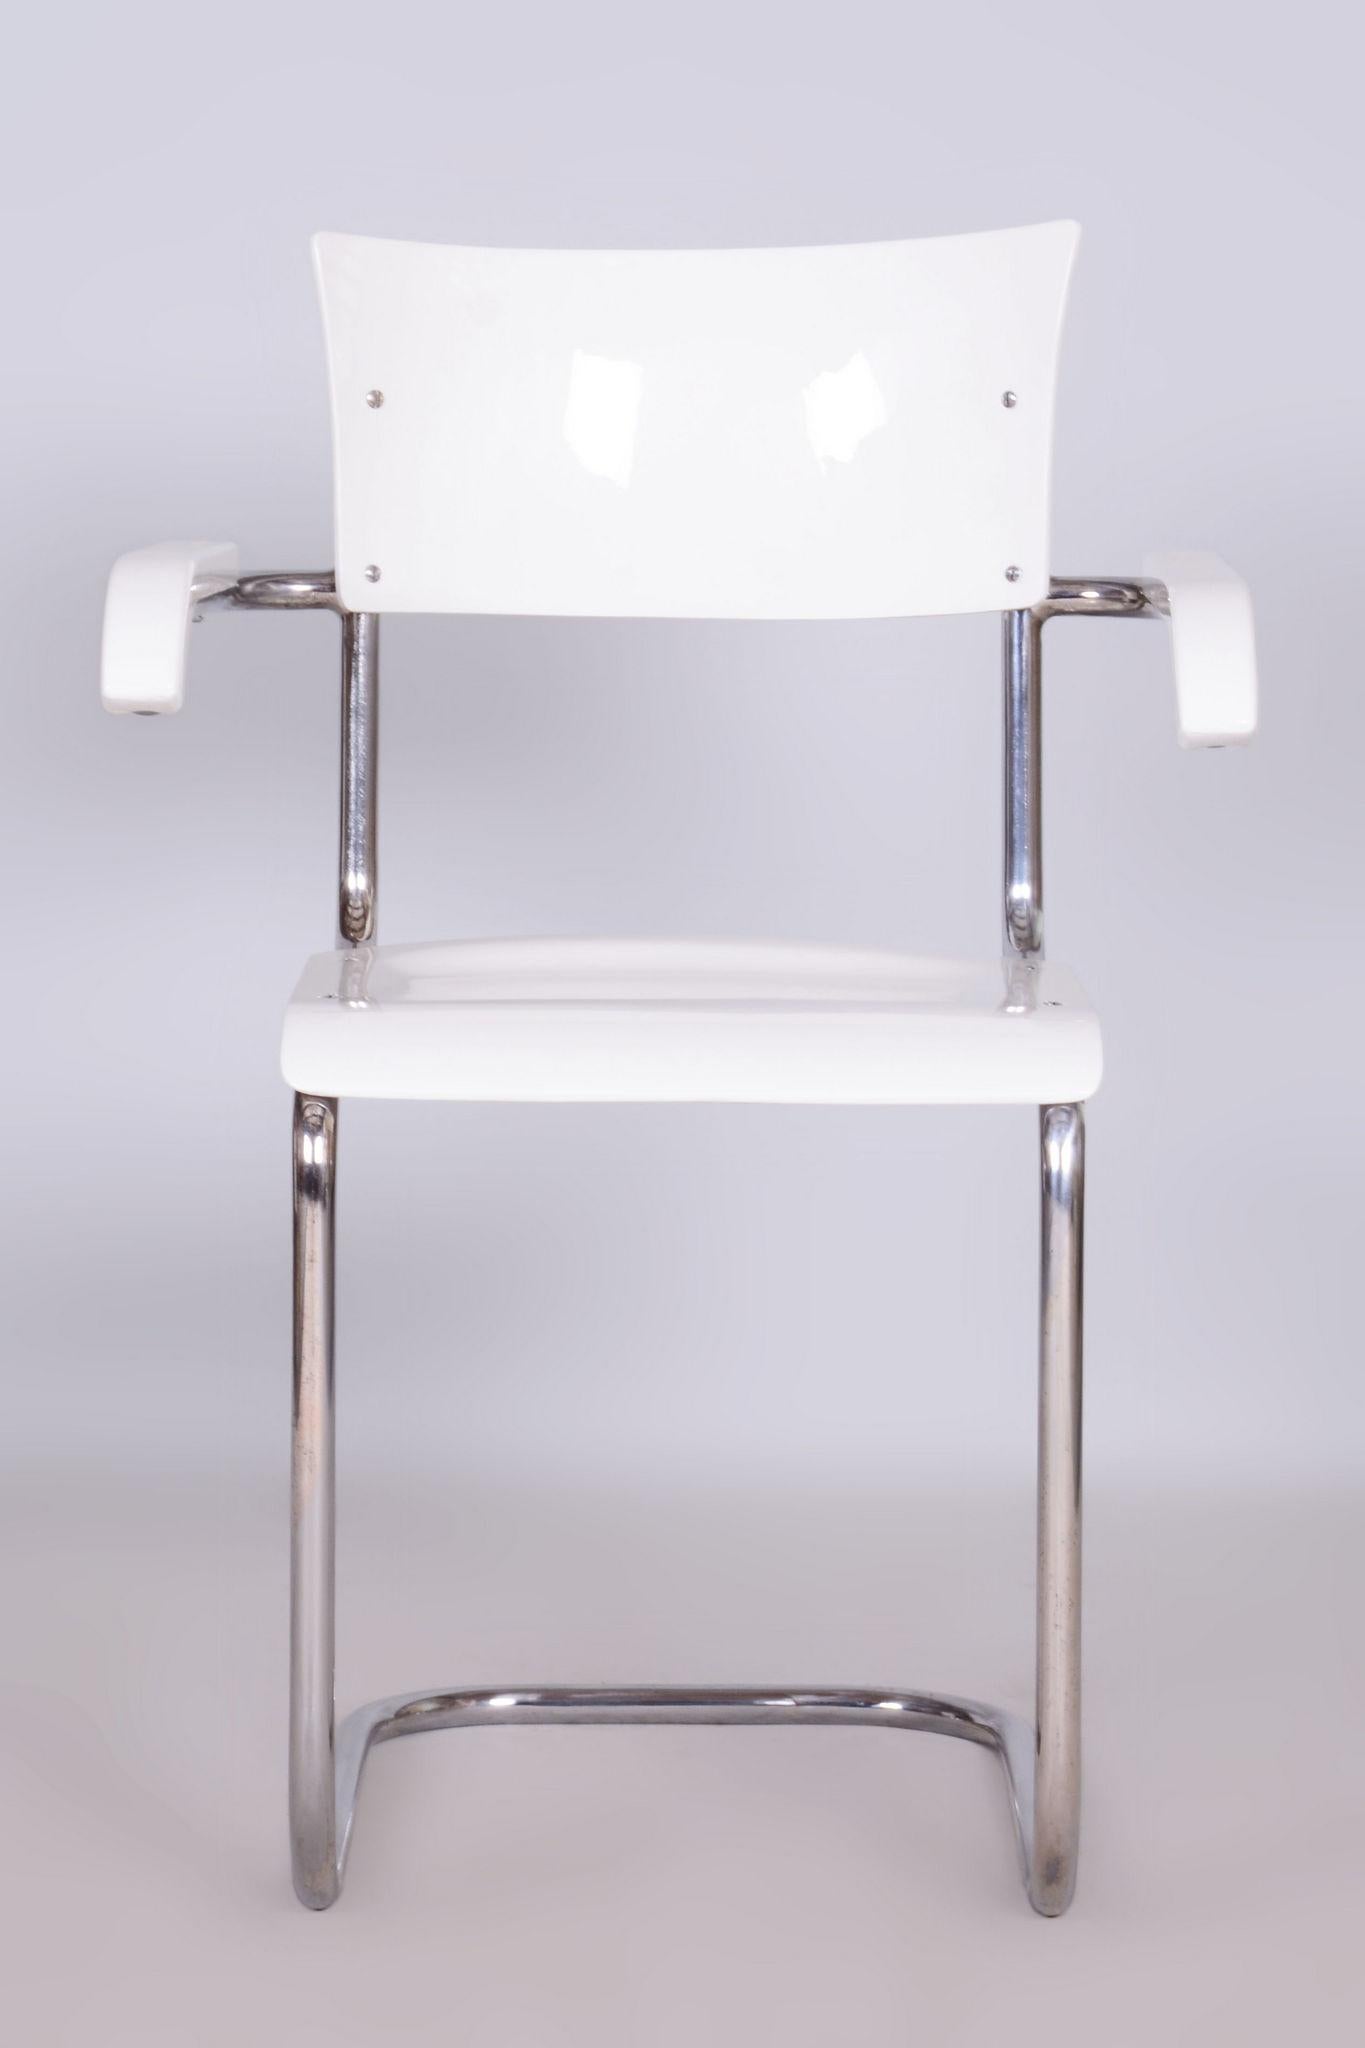 Steel Restored Bauhaus Pair of Chairs, by Mart Stam, Chrome, Germany, 1930s For Sale